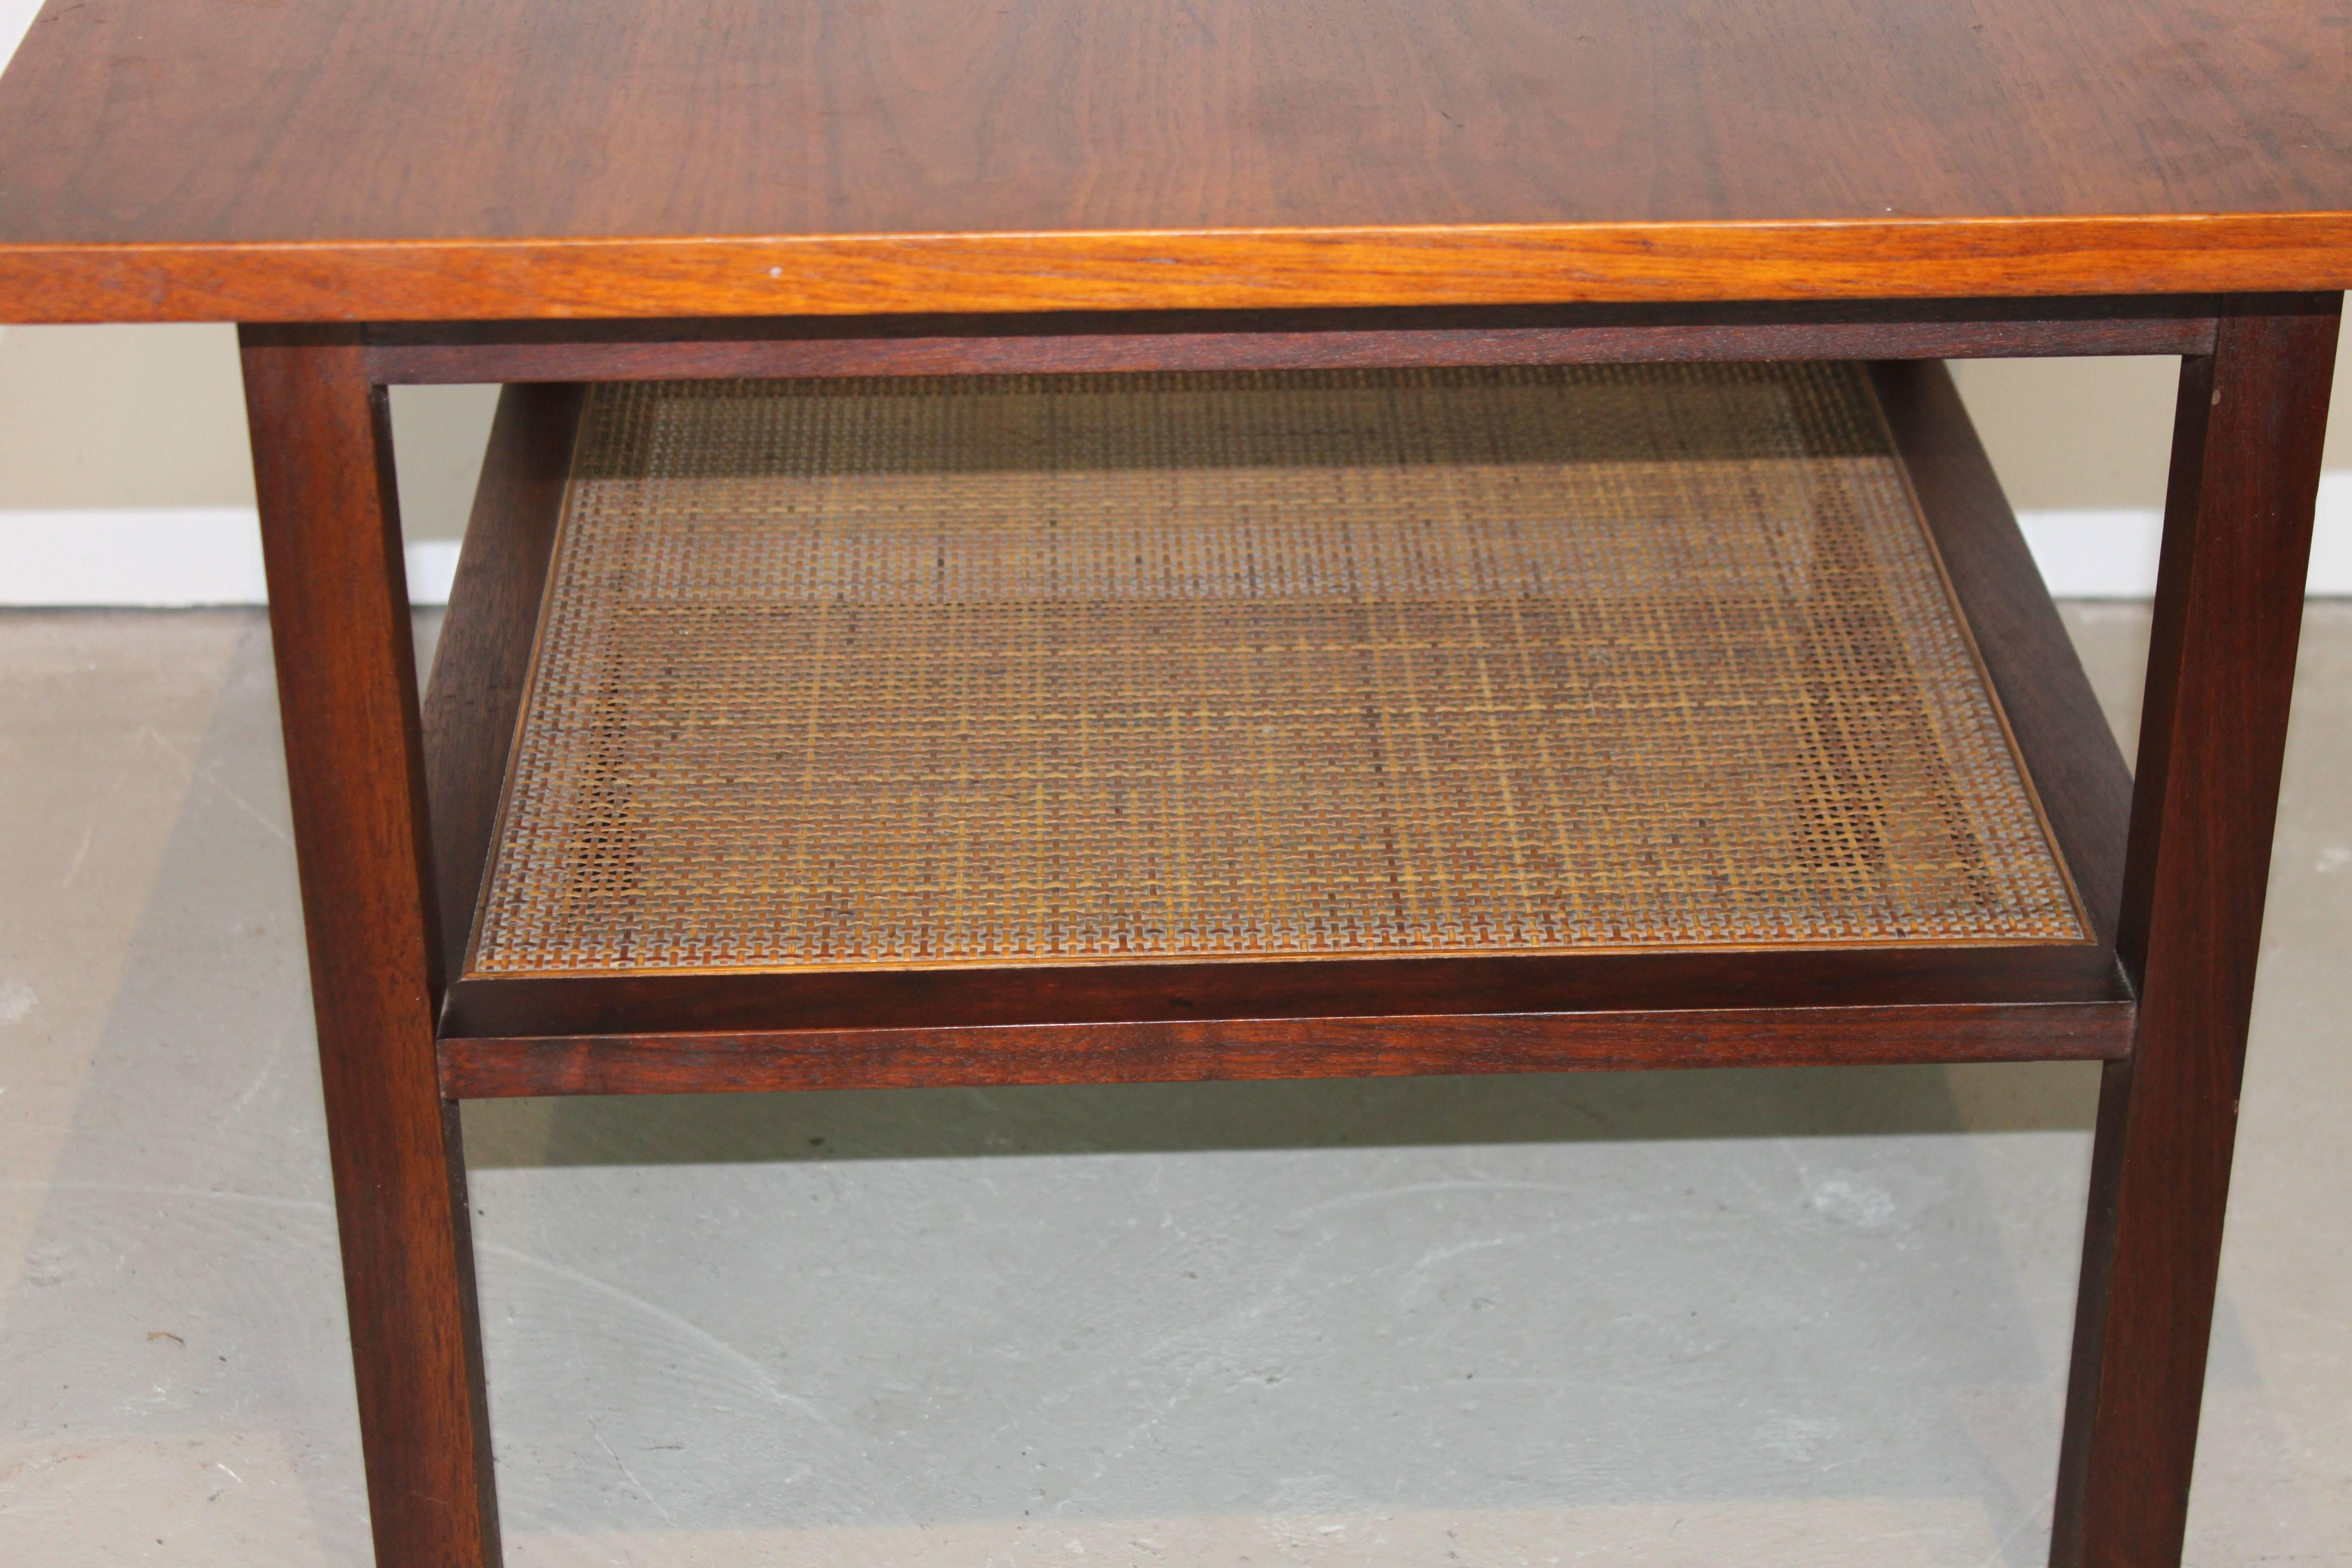 Pair of Mid-Century Modern walnut top and rosewood base end tables with cane shelf. Tables are in very good original condition. Random spots on finish noted on the tabletops. Overall in very good shape. One minor unnoticeable nick to the cane shelf